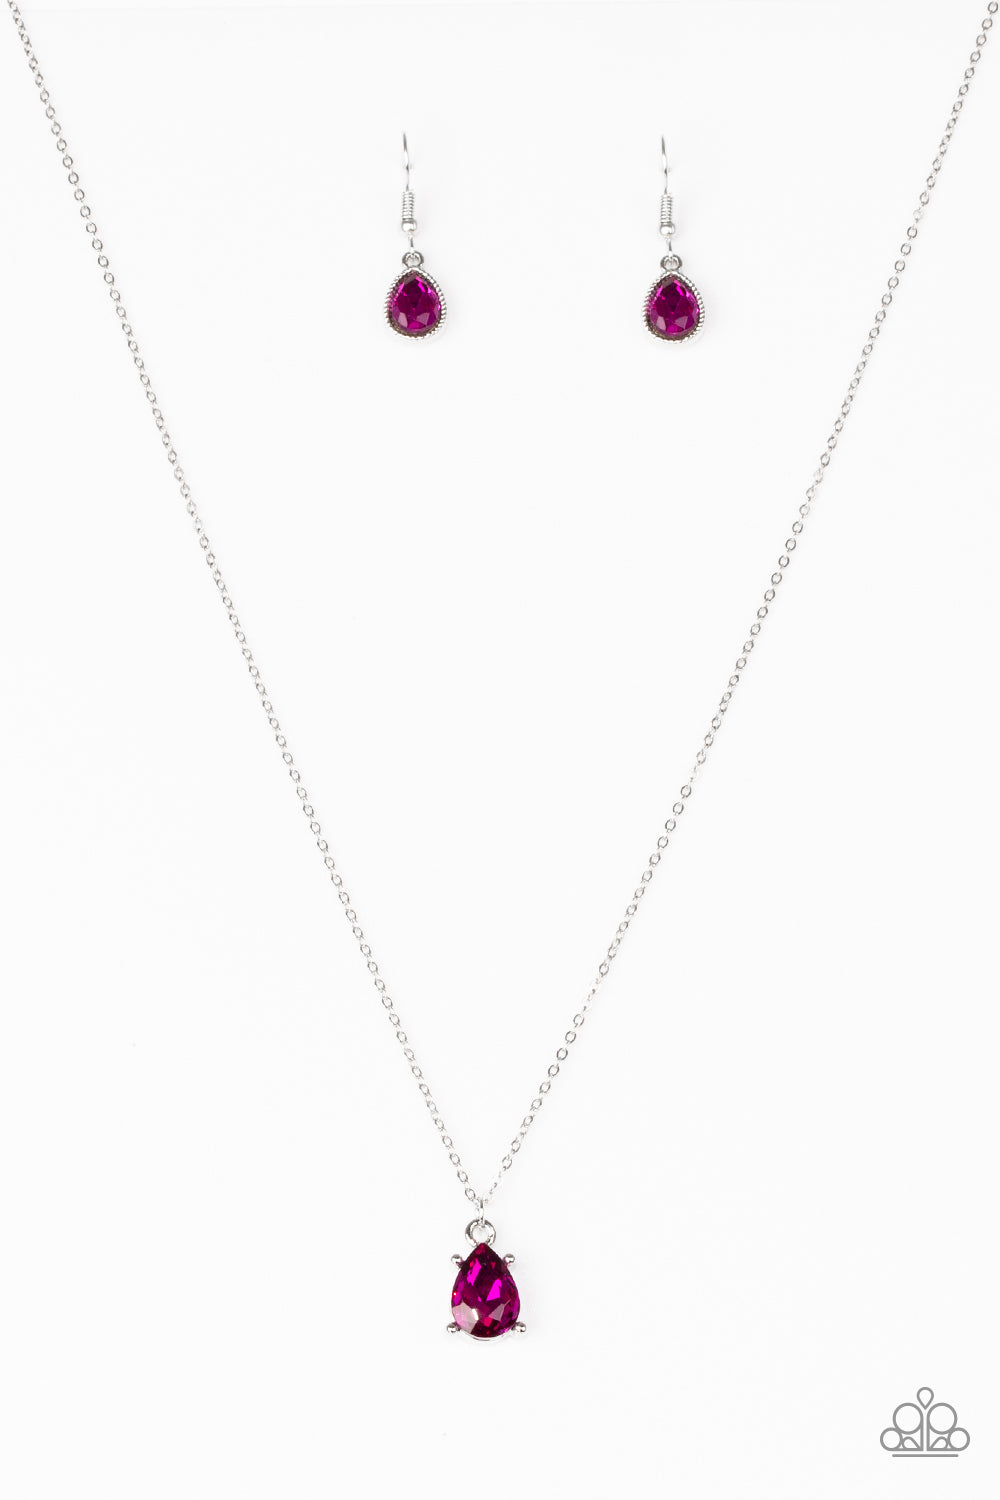 Paparazzi Classy Classicist - Pink Necklace - A Finishing Touch Jewelry